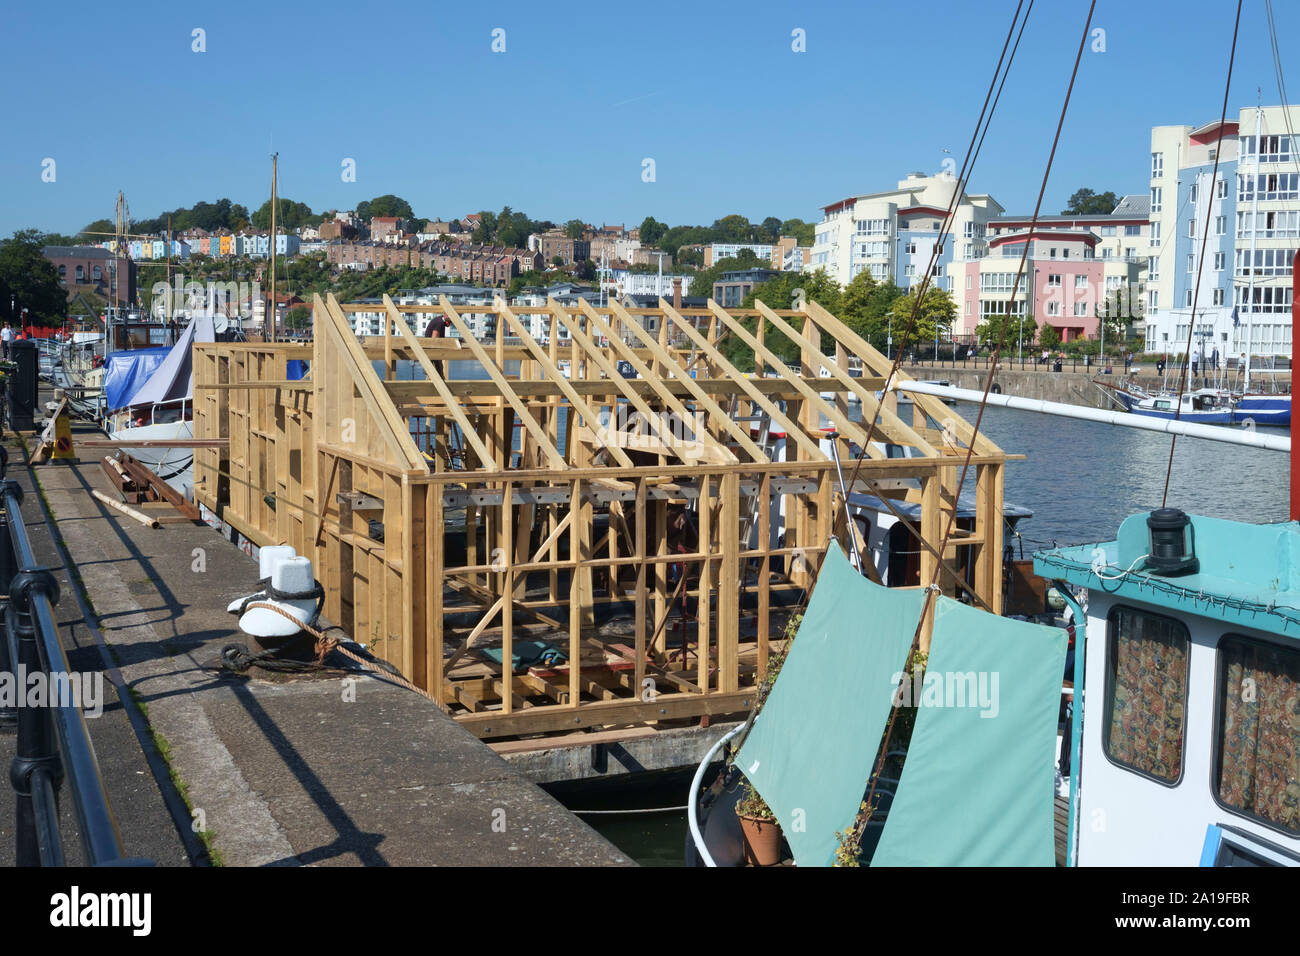 Seen Along The Harbourside In Bristol Uk Building A House Boat On Anold Concrete Barge The Ferro Stock Photo Alamy